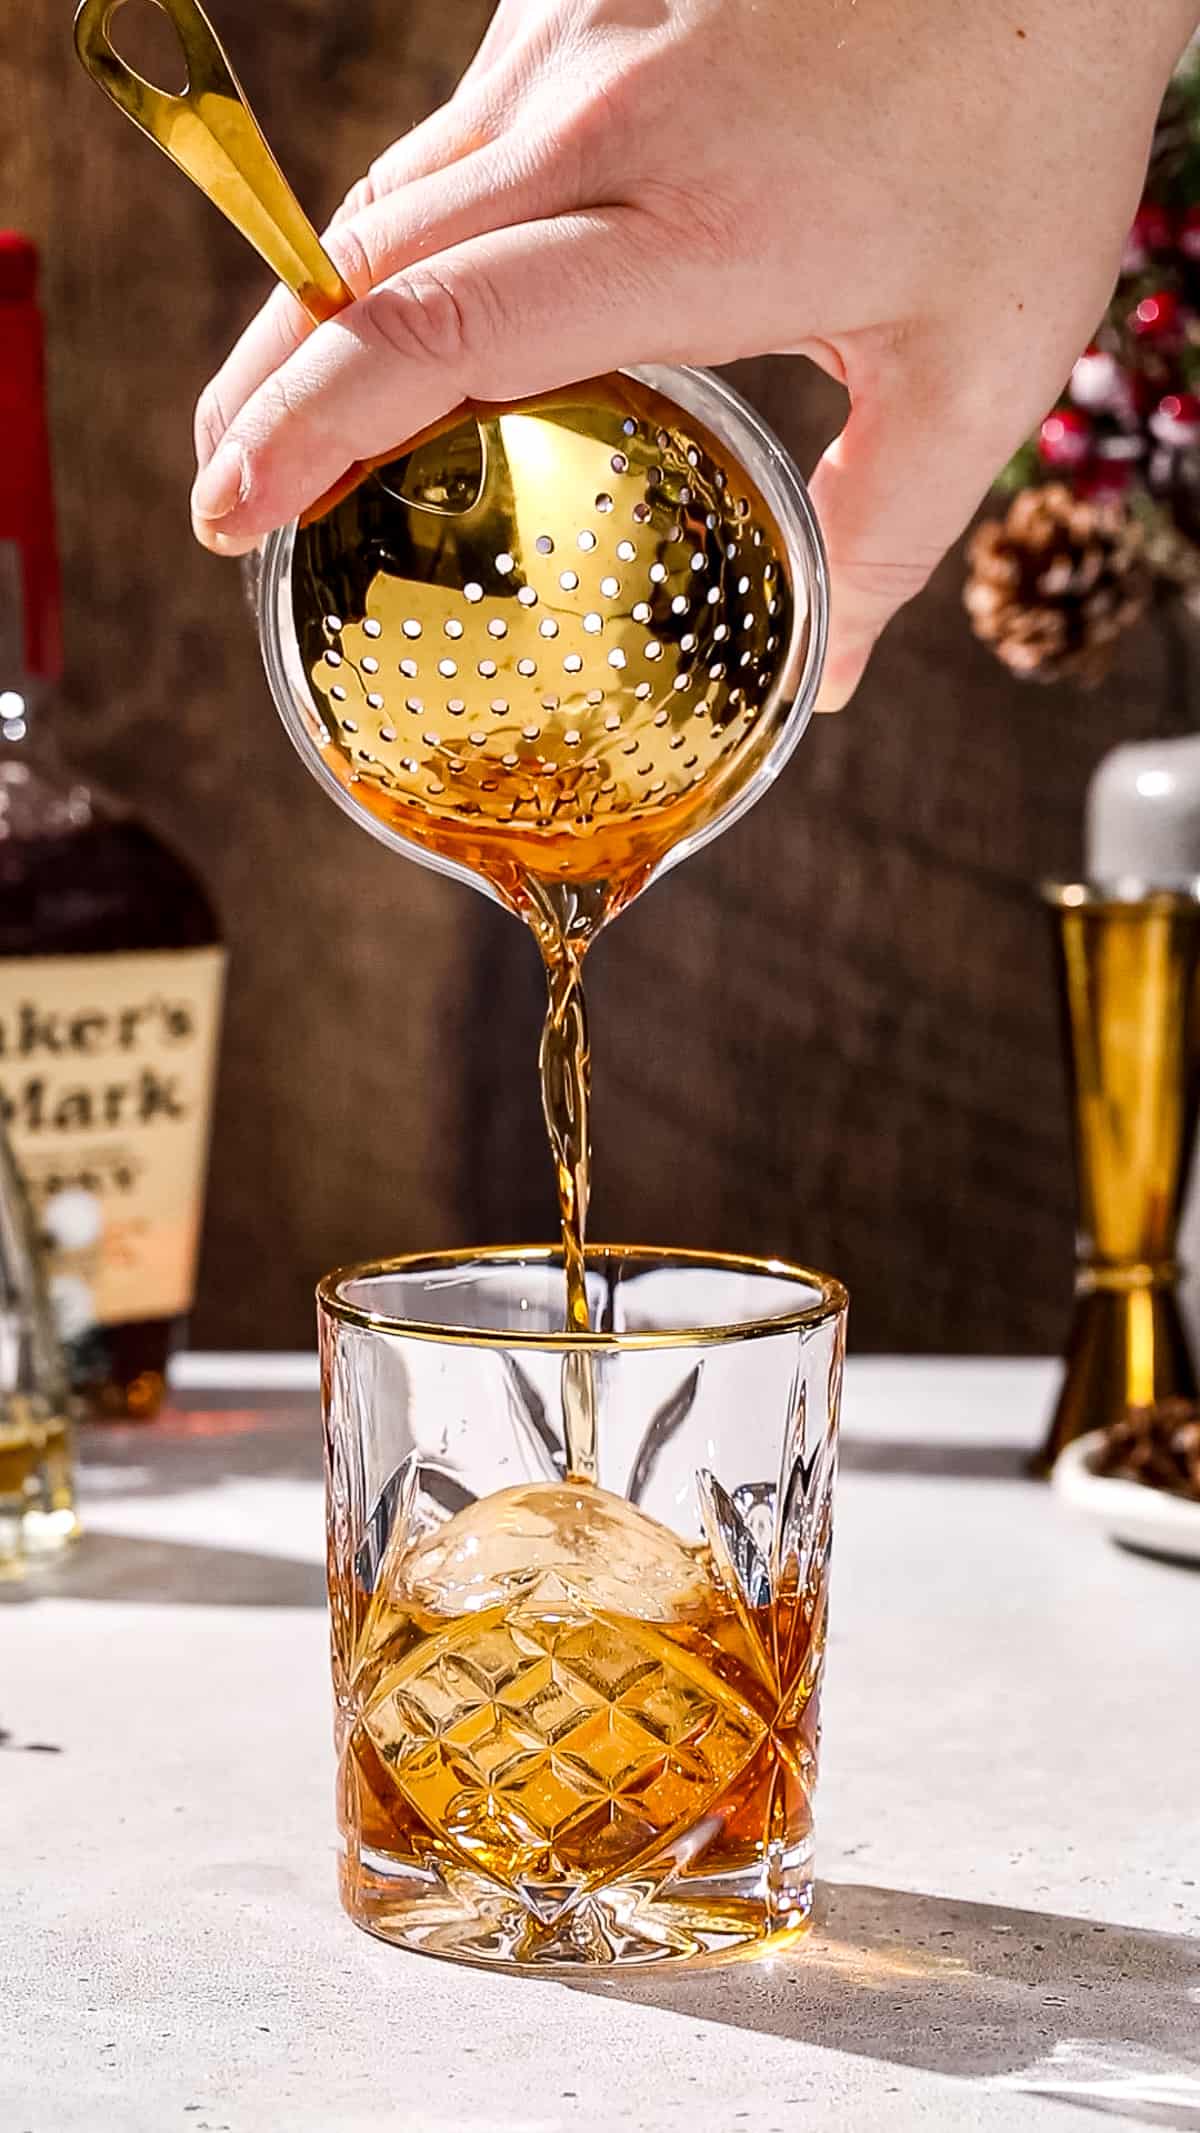 Hand using a gold julep strainer to strain a cocktail into a serving glass that has a large ice sphere in it.